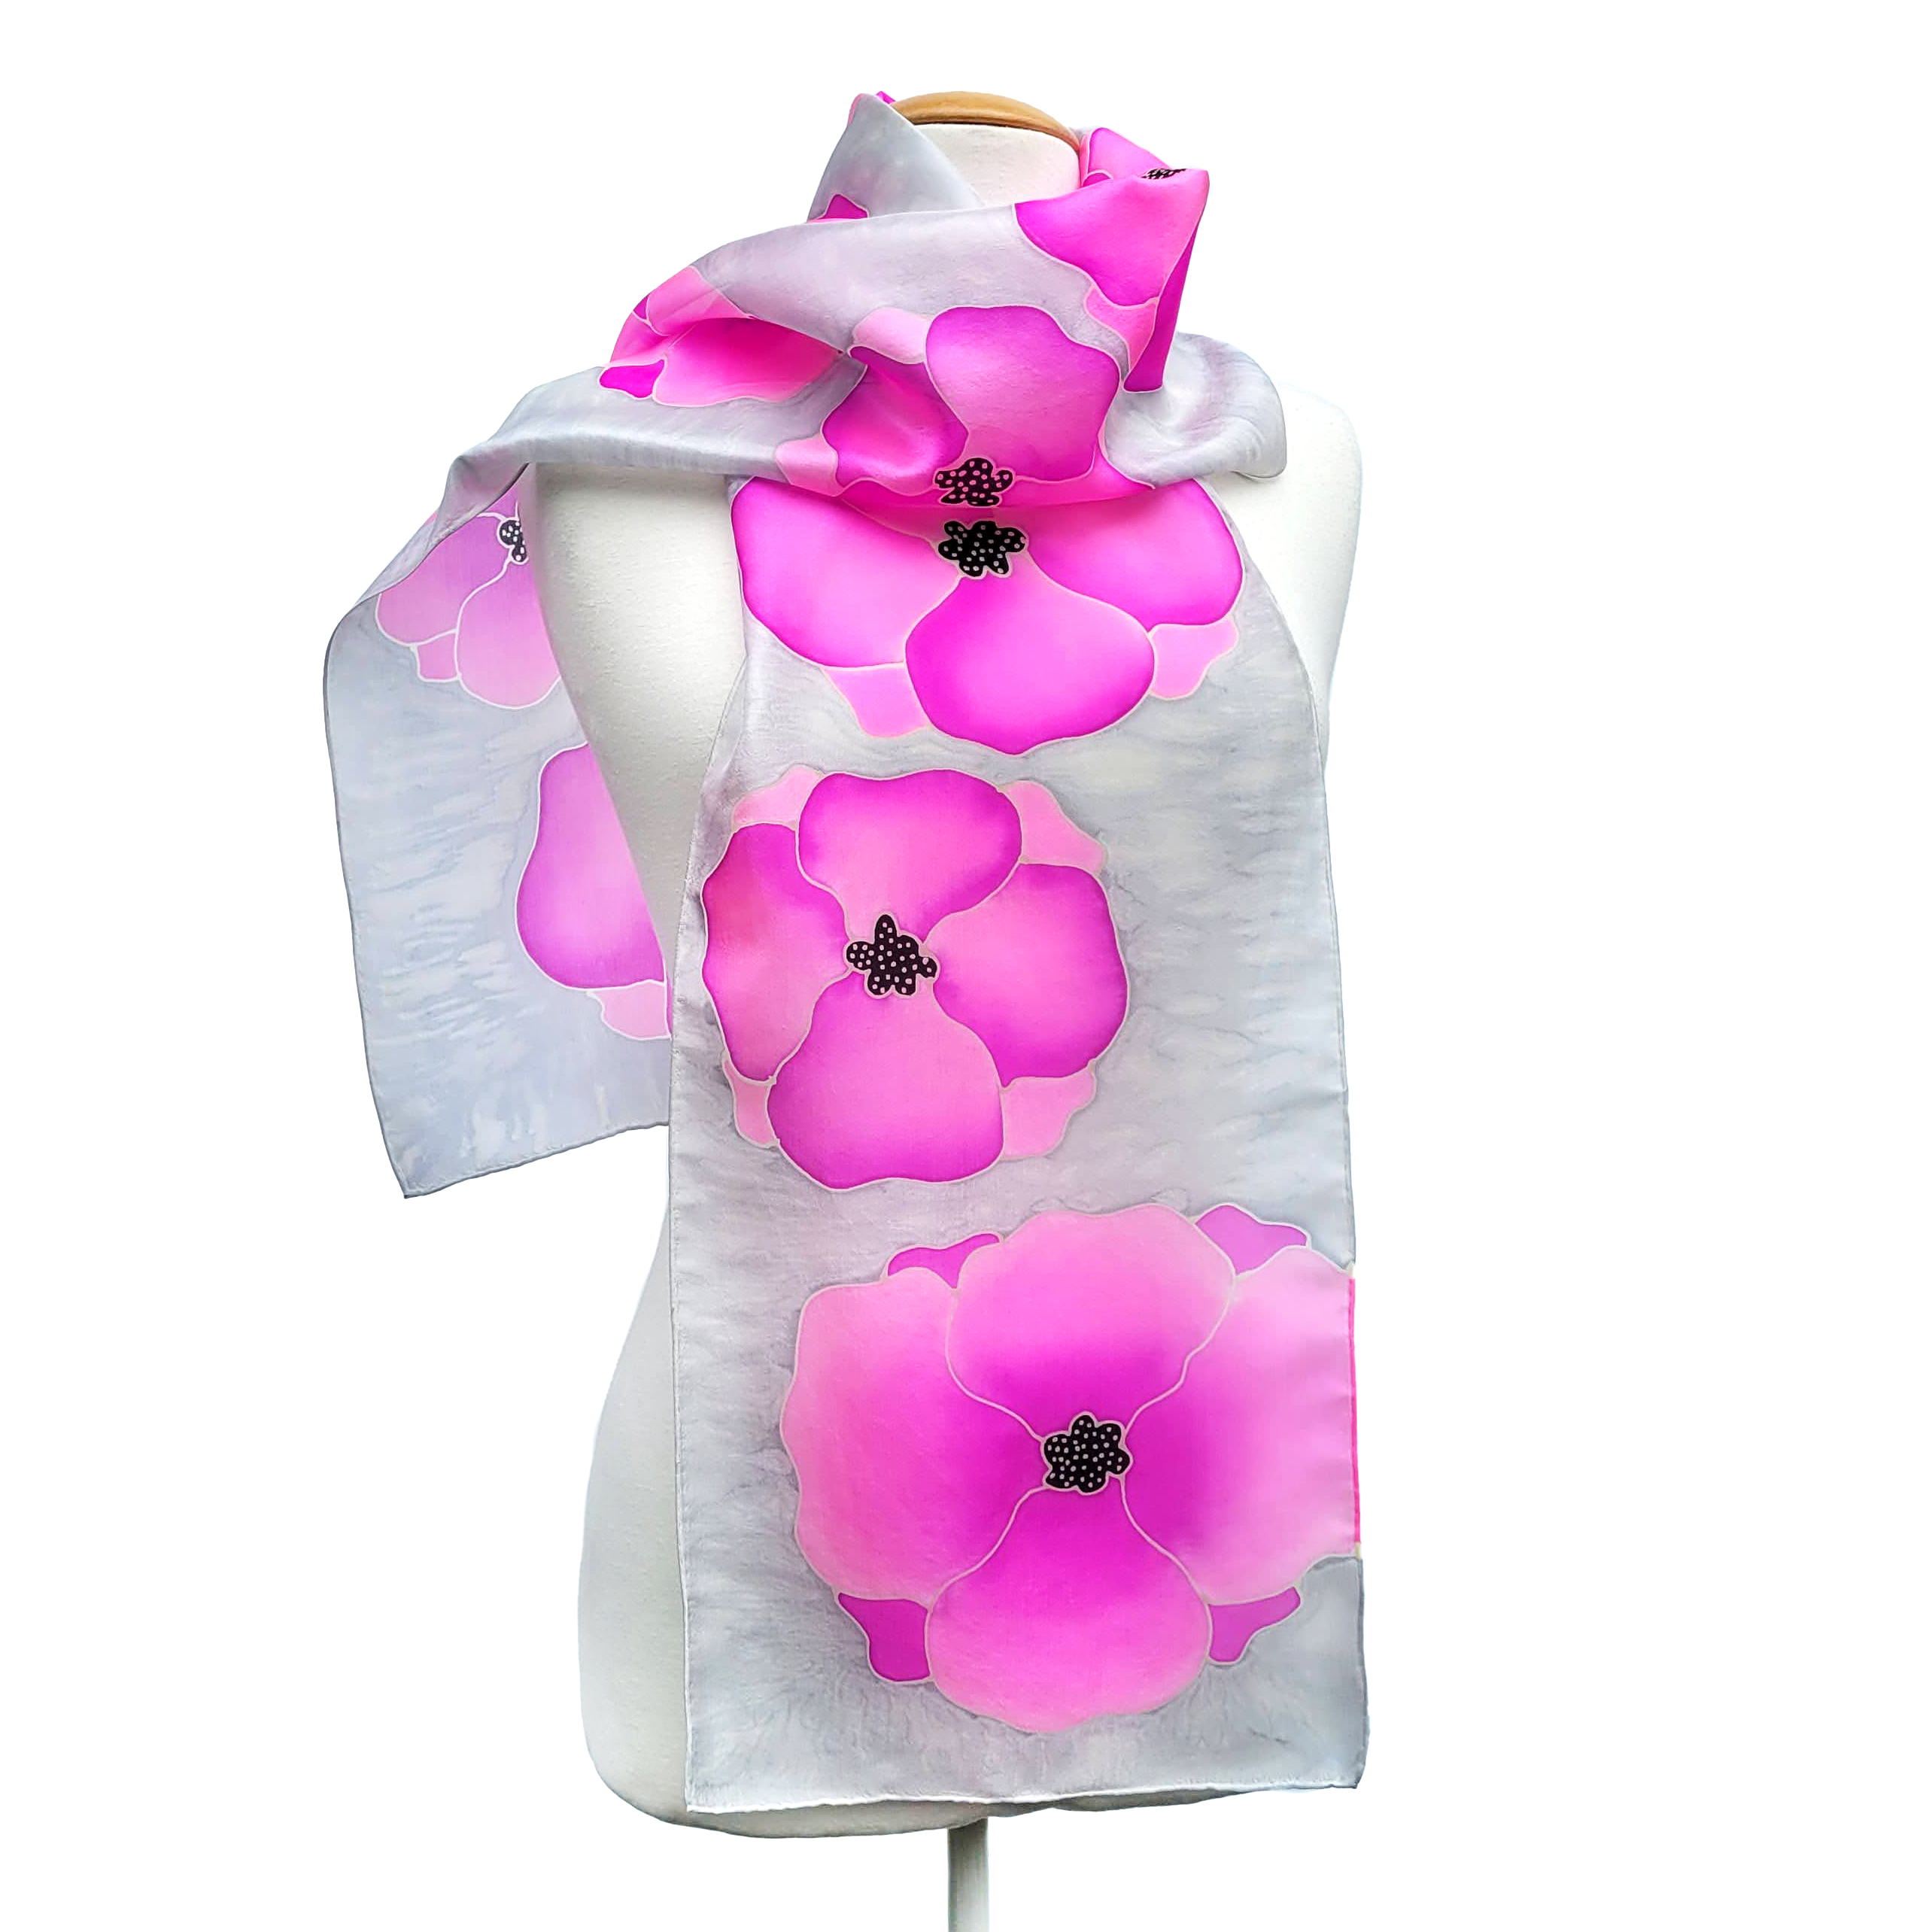 Silk scarf ladies accessory hand painted pink and silver color handmade by Lynne Kiel